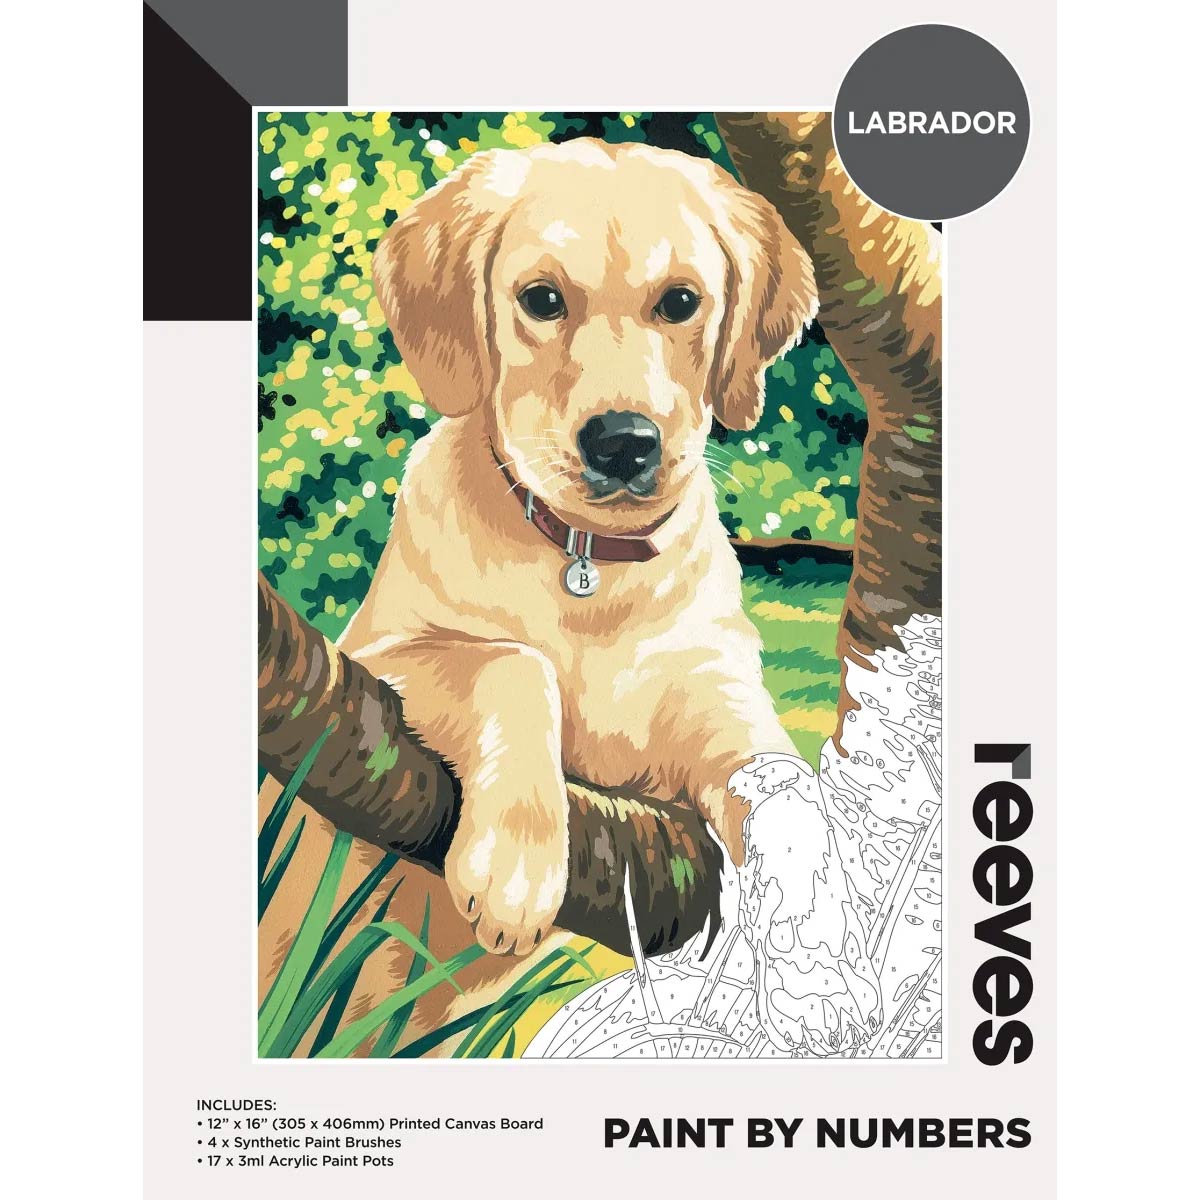 Reeves Paint by Numbers Large 12x16 inch - Labrador